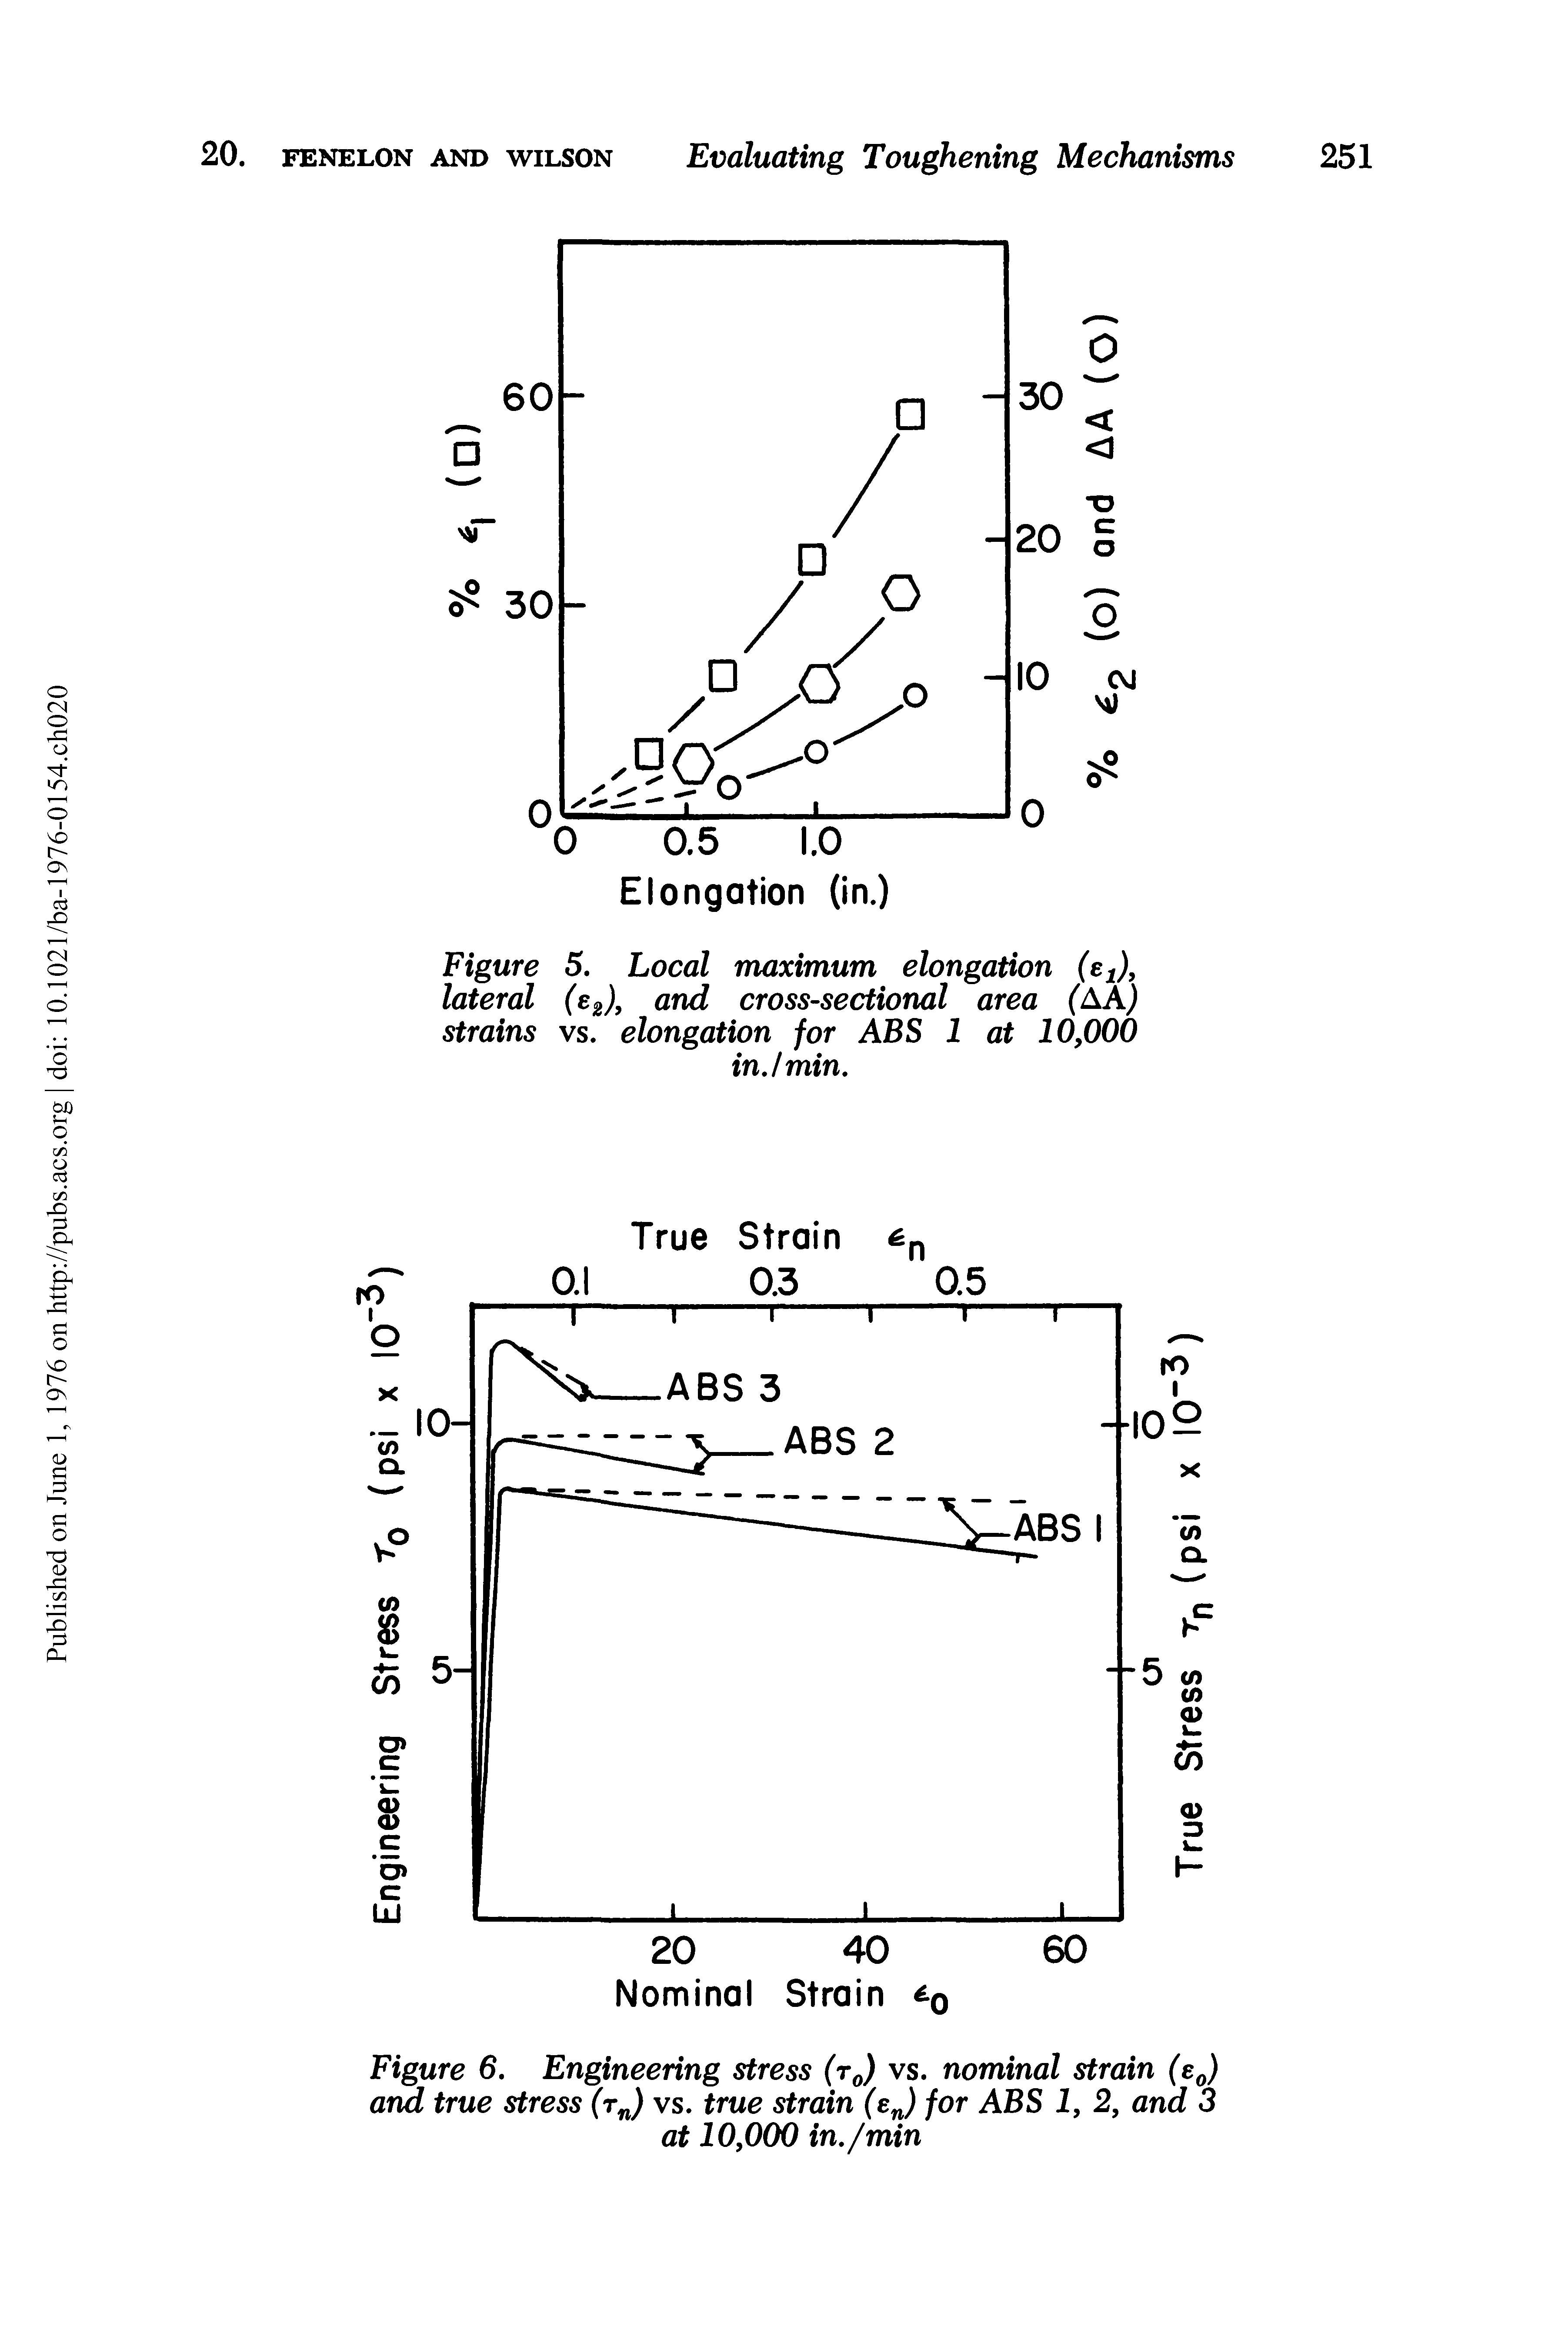 Figure 6. Engineering stress (r0) vs. nominal strain (e0) and true stress (rn) vs. true strain (en) for ABS 1, 2, and 3 at 10,000 in./min...